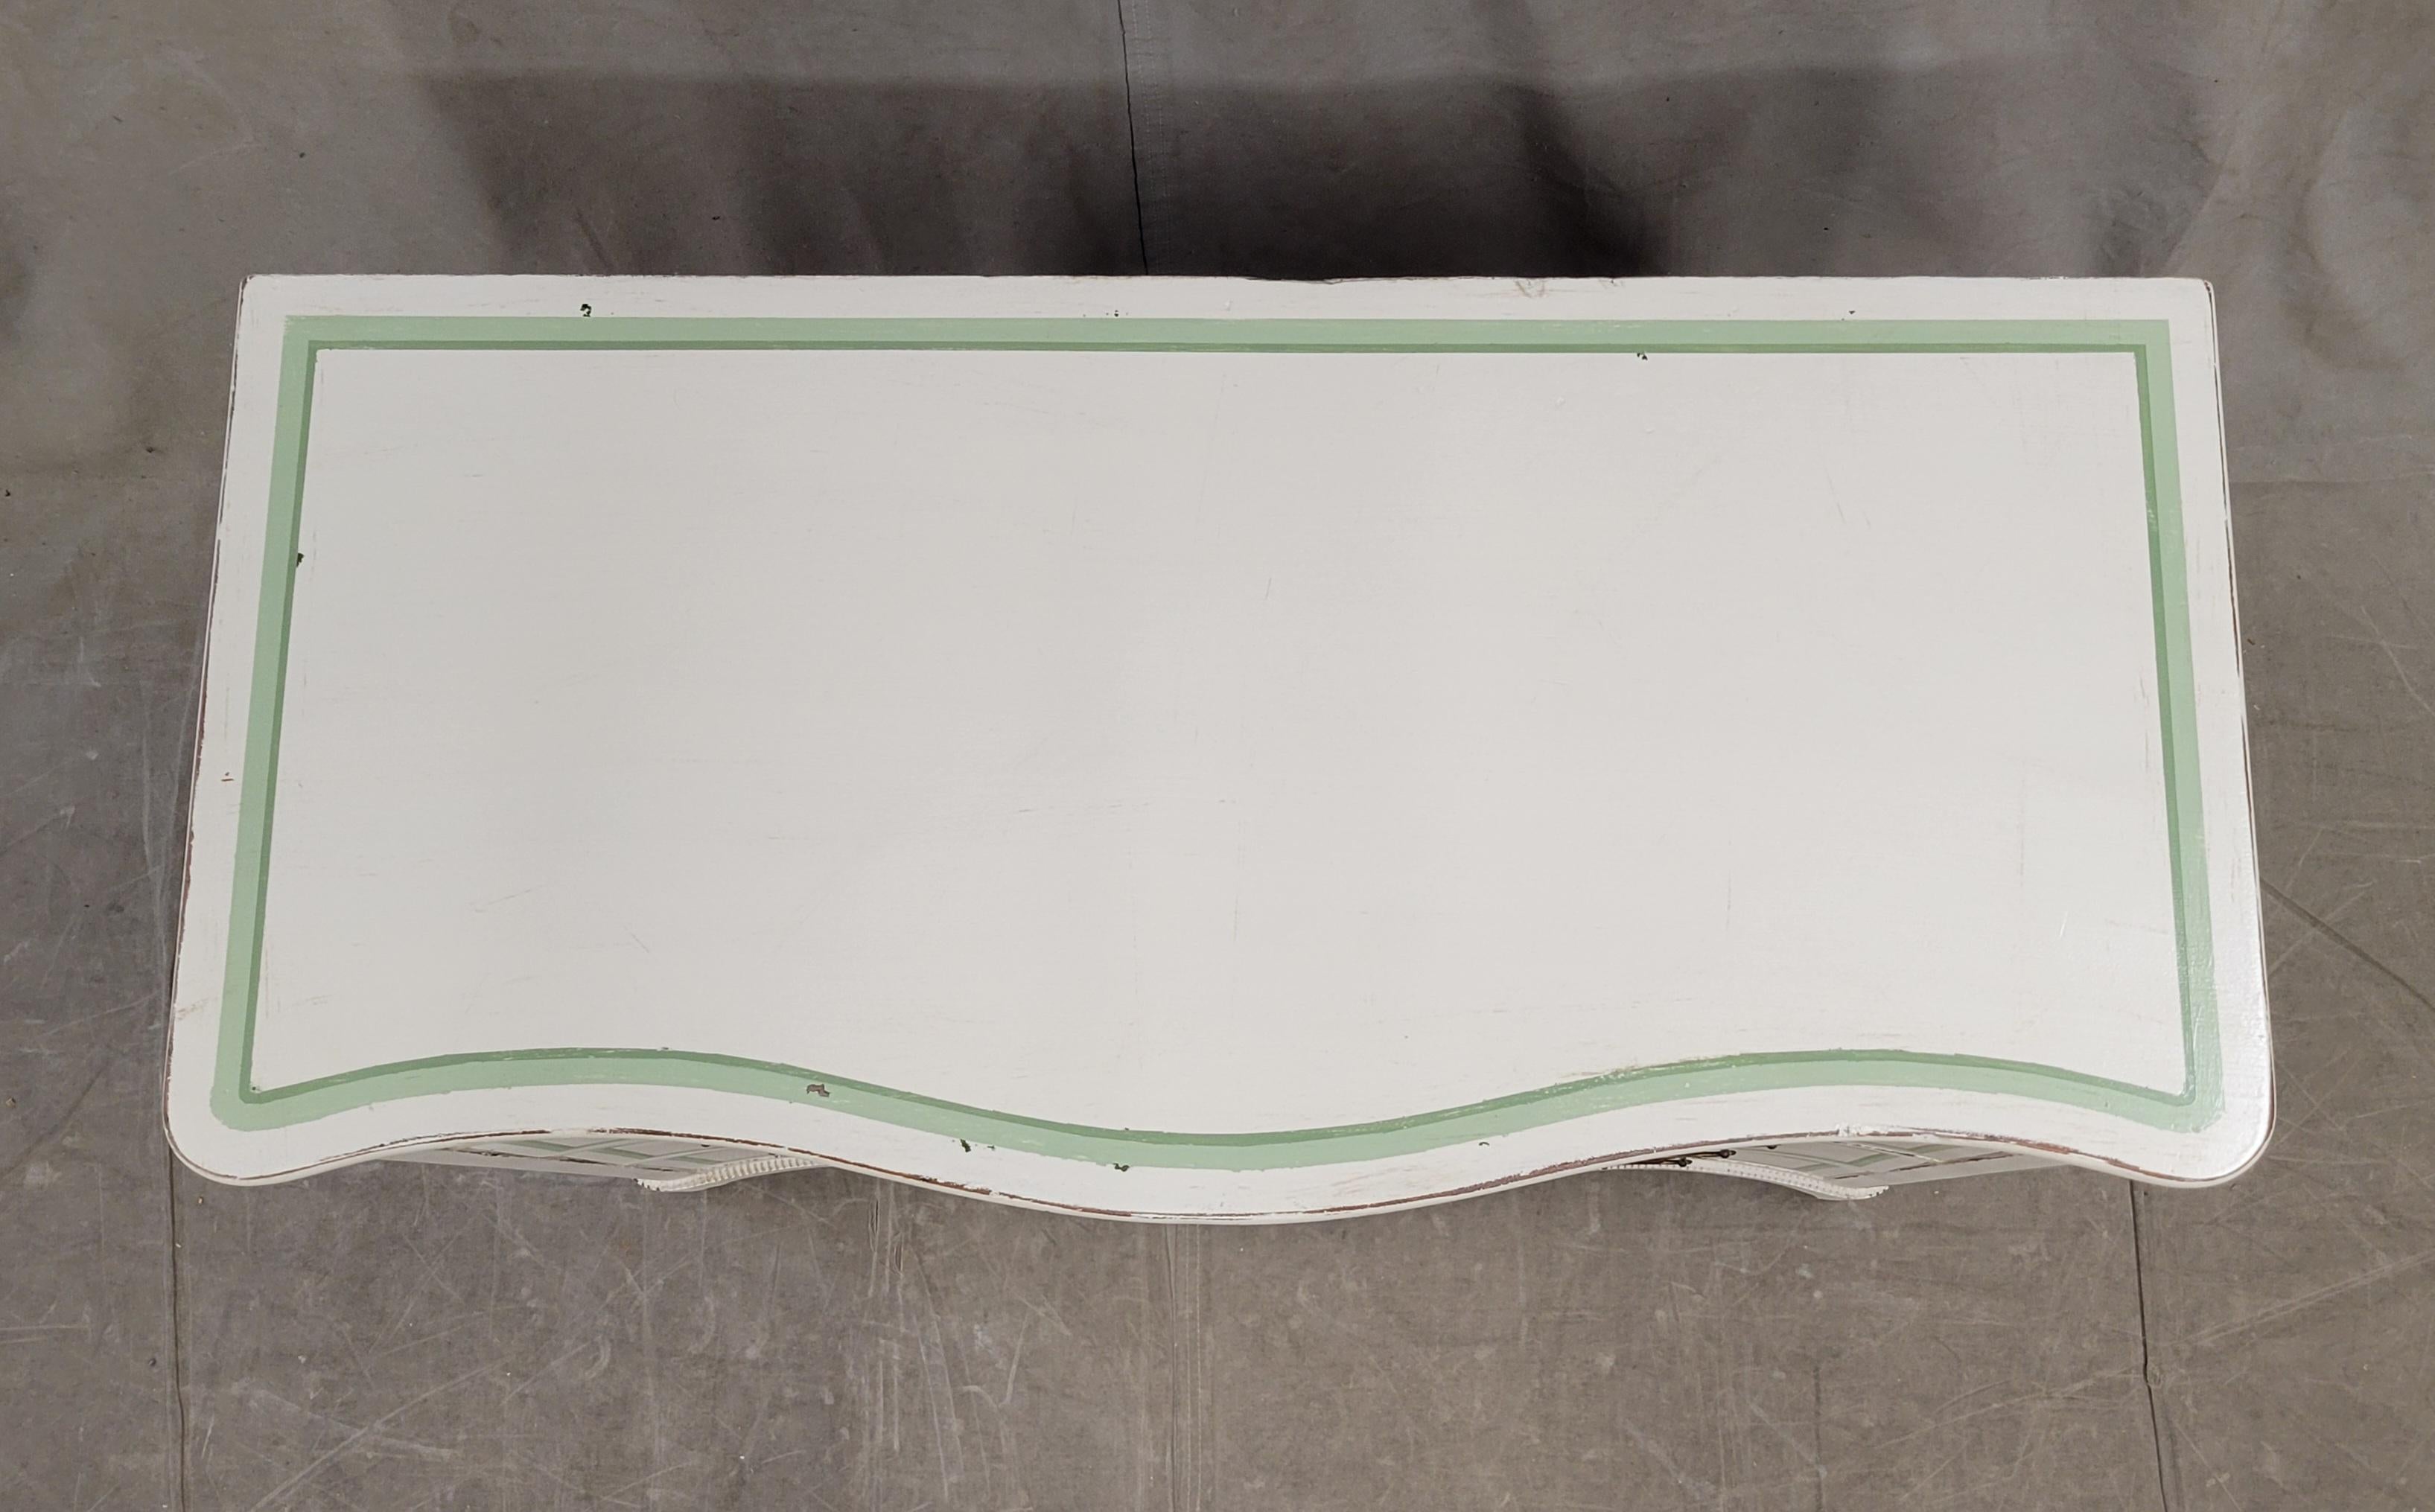 Brass Antique Serpentine Front Dresser Painted White With Green French Line Motif For Sale